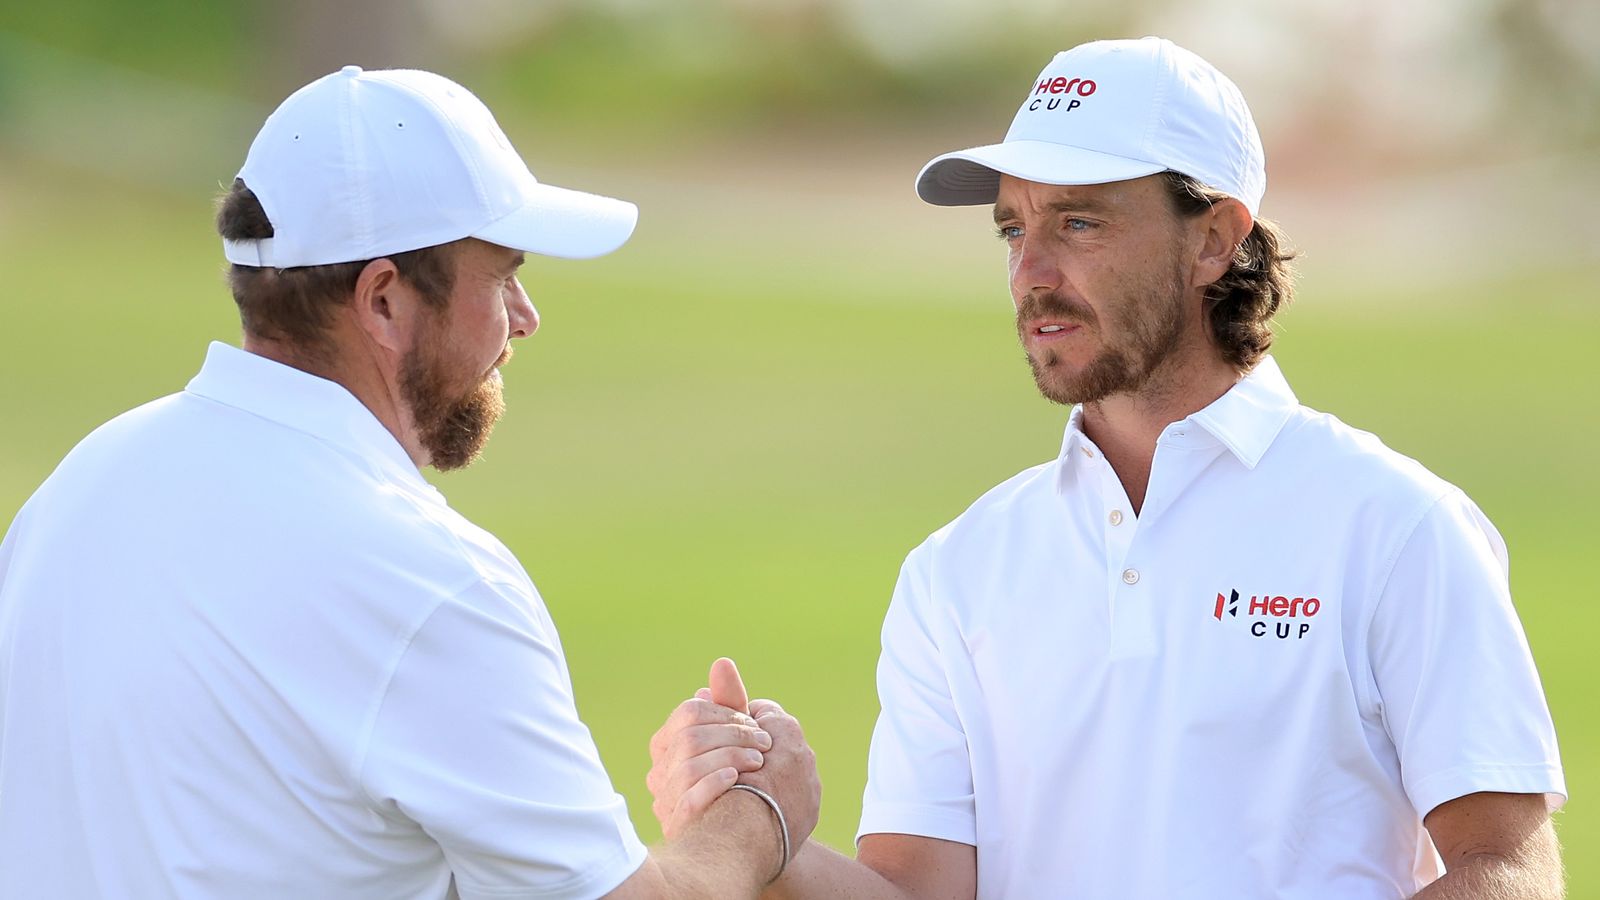 Ryder Cup: Who can make early push for Team Europe qualification at Abu Dhabi HSBC Championship?